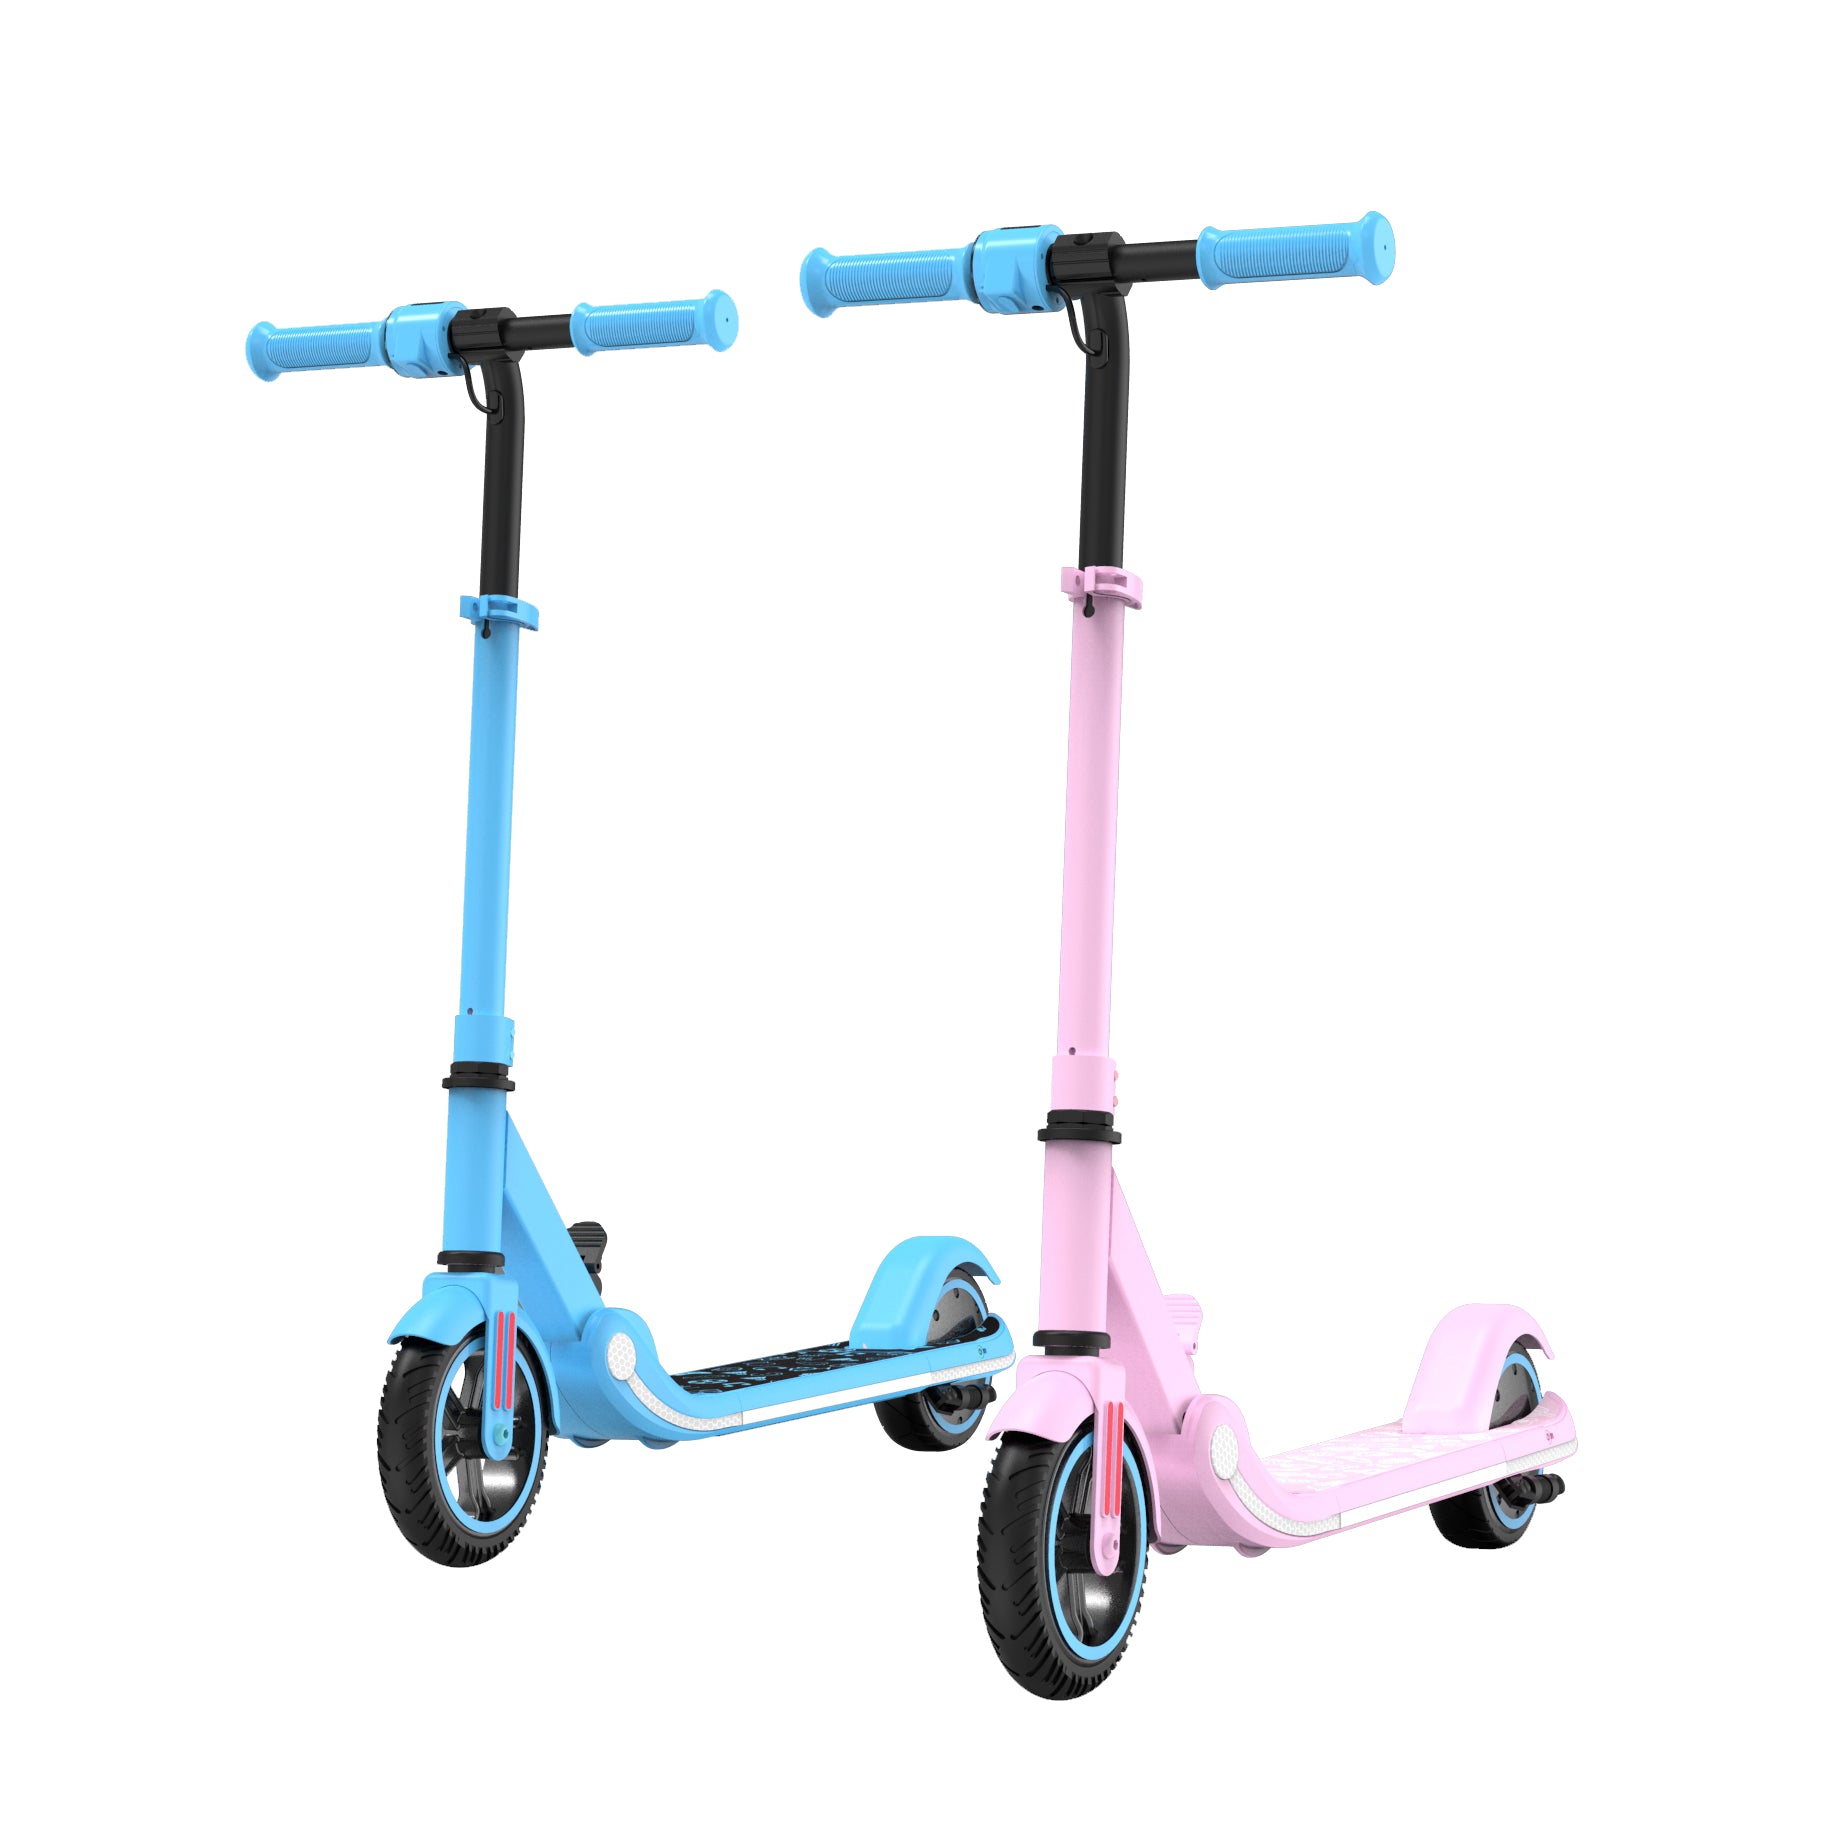 EU Warehouse Wholesale Children's Scooter Electric Toys Kids Scooter Gift 150W Quick Folding Steel Plastic Monopattino Electric | Electrr Inc